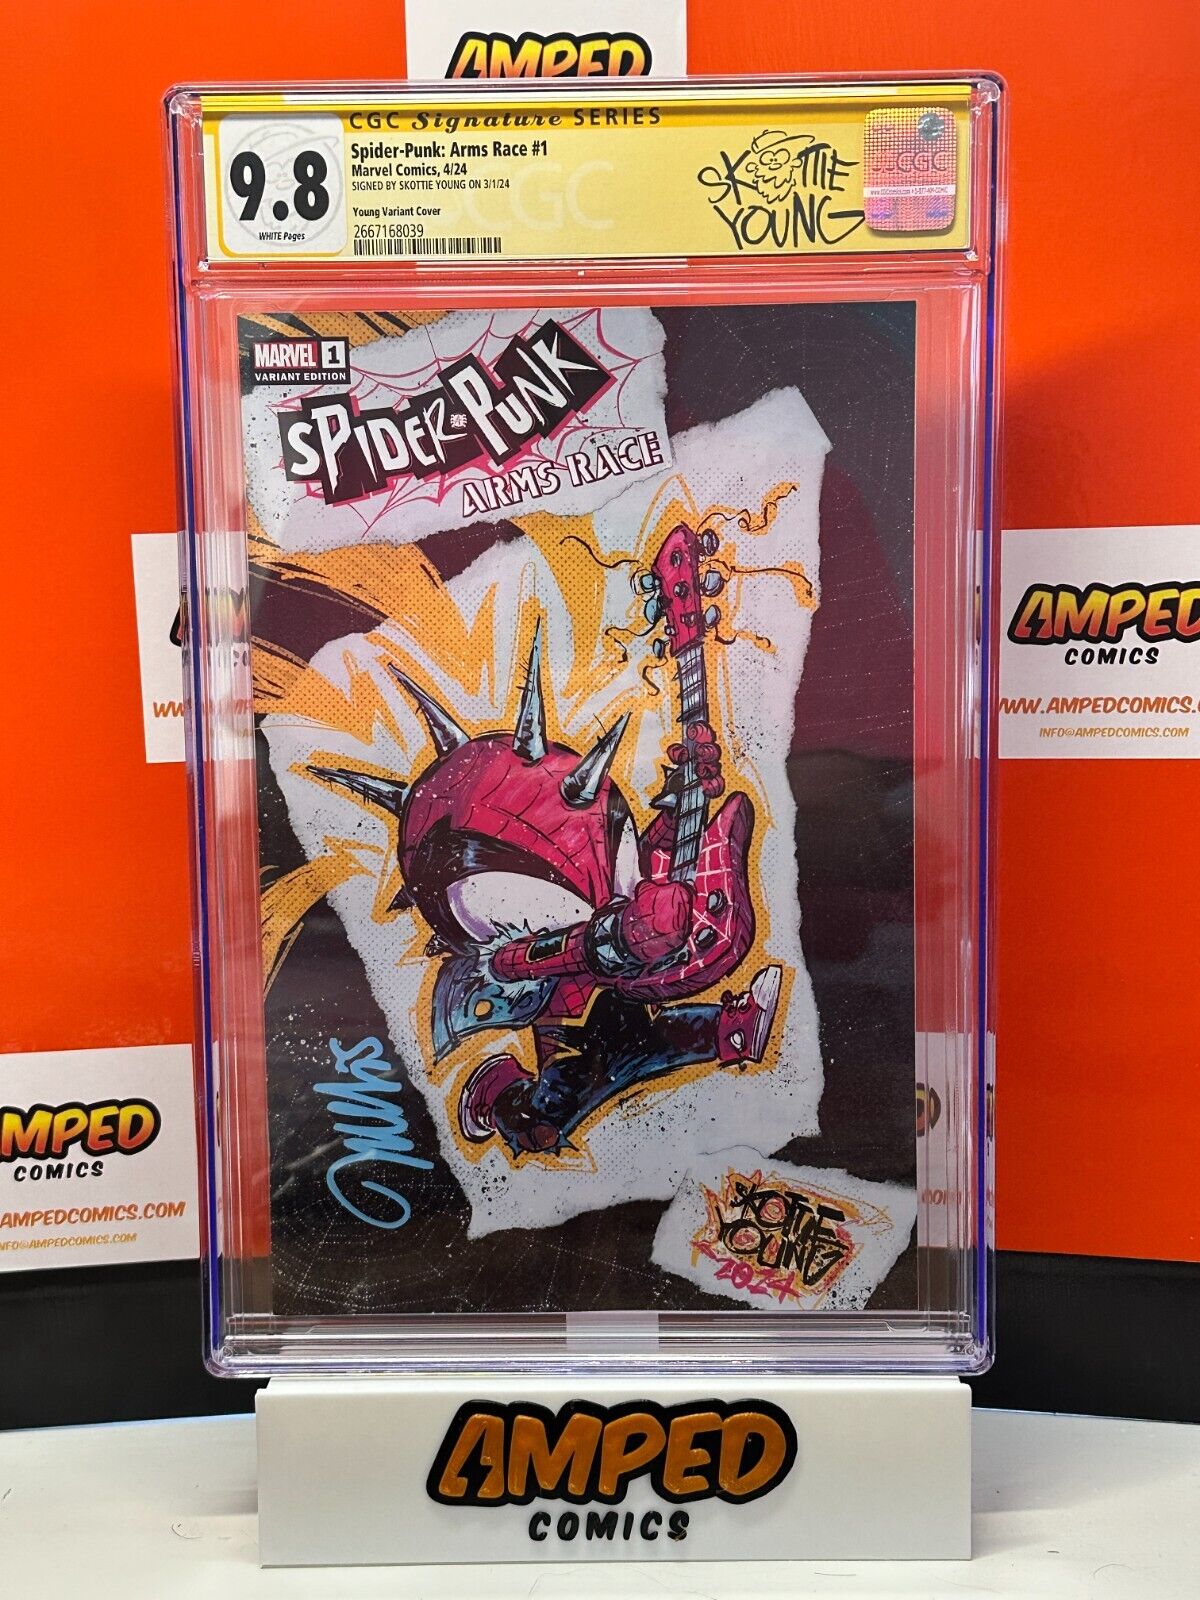 Spider-Punk Arms Race #1 CGC 9.8 SIGNED with Skottie Young label